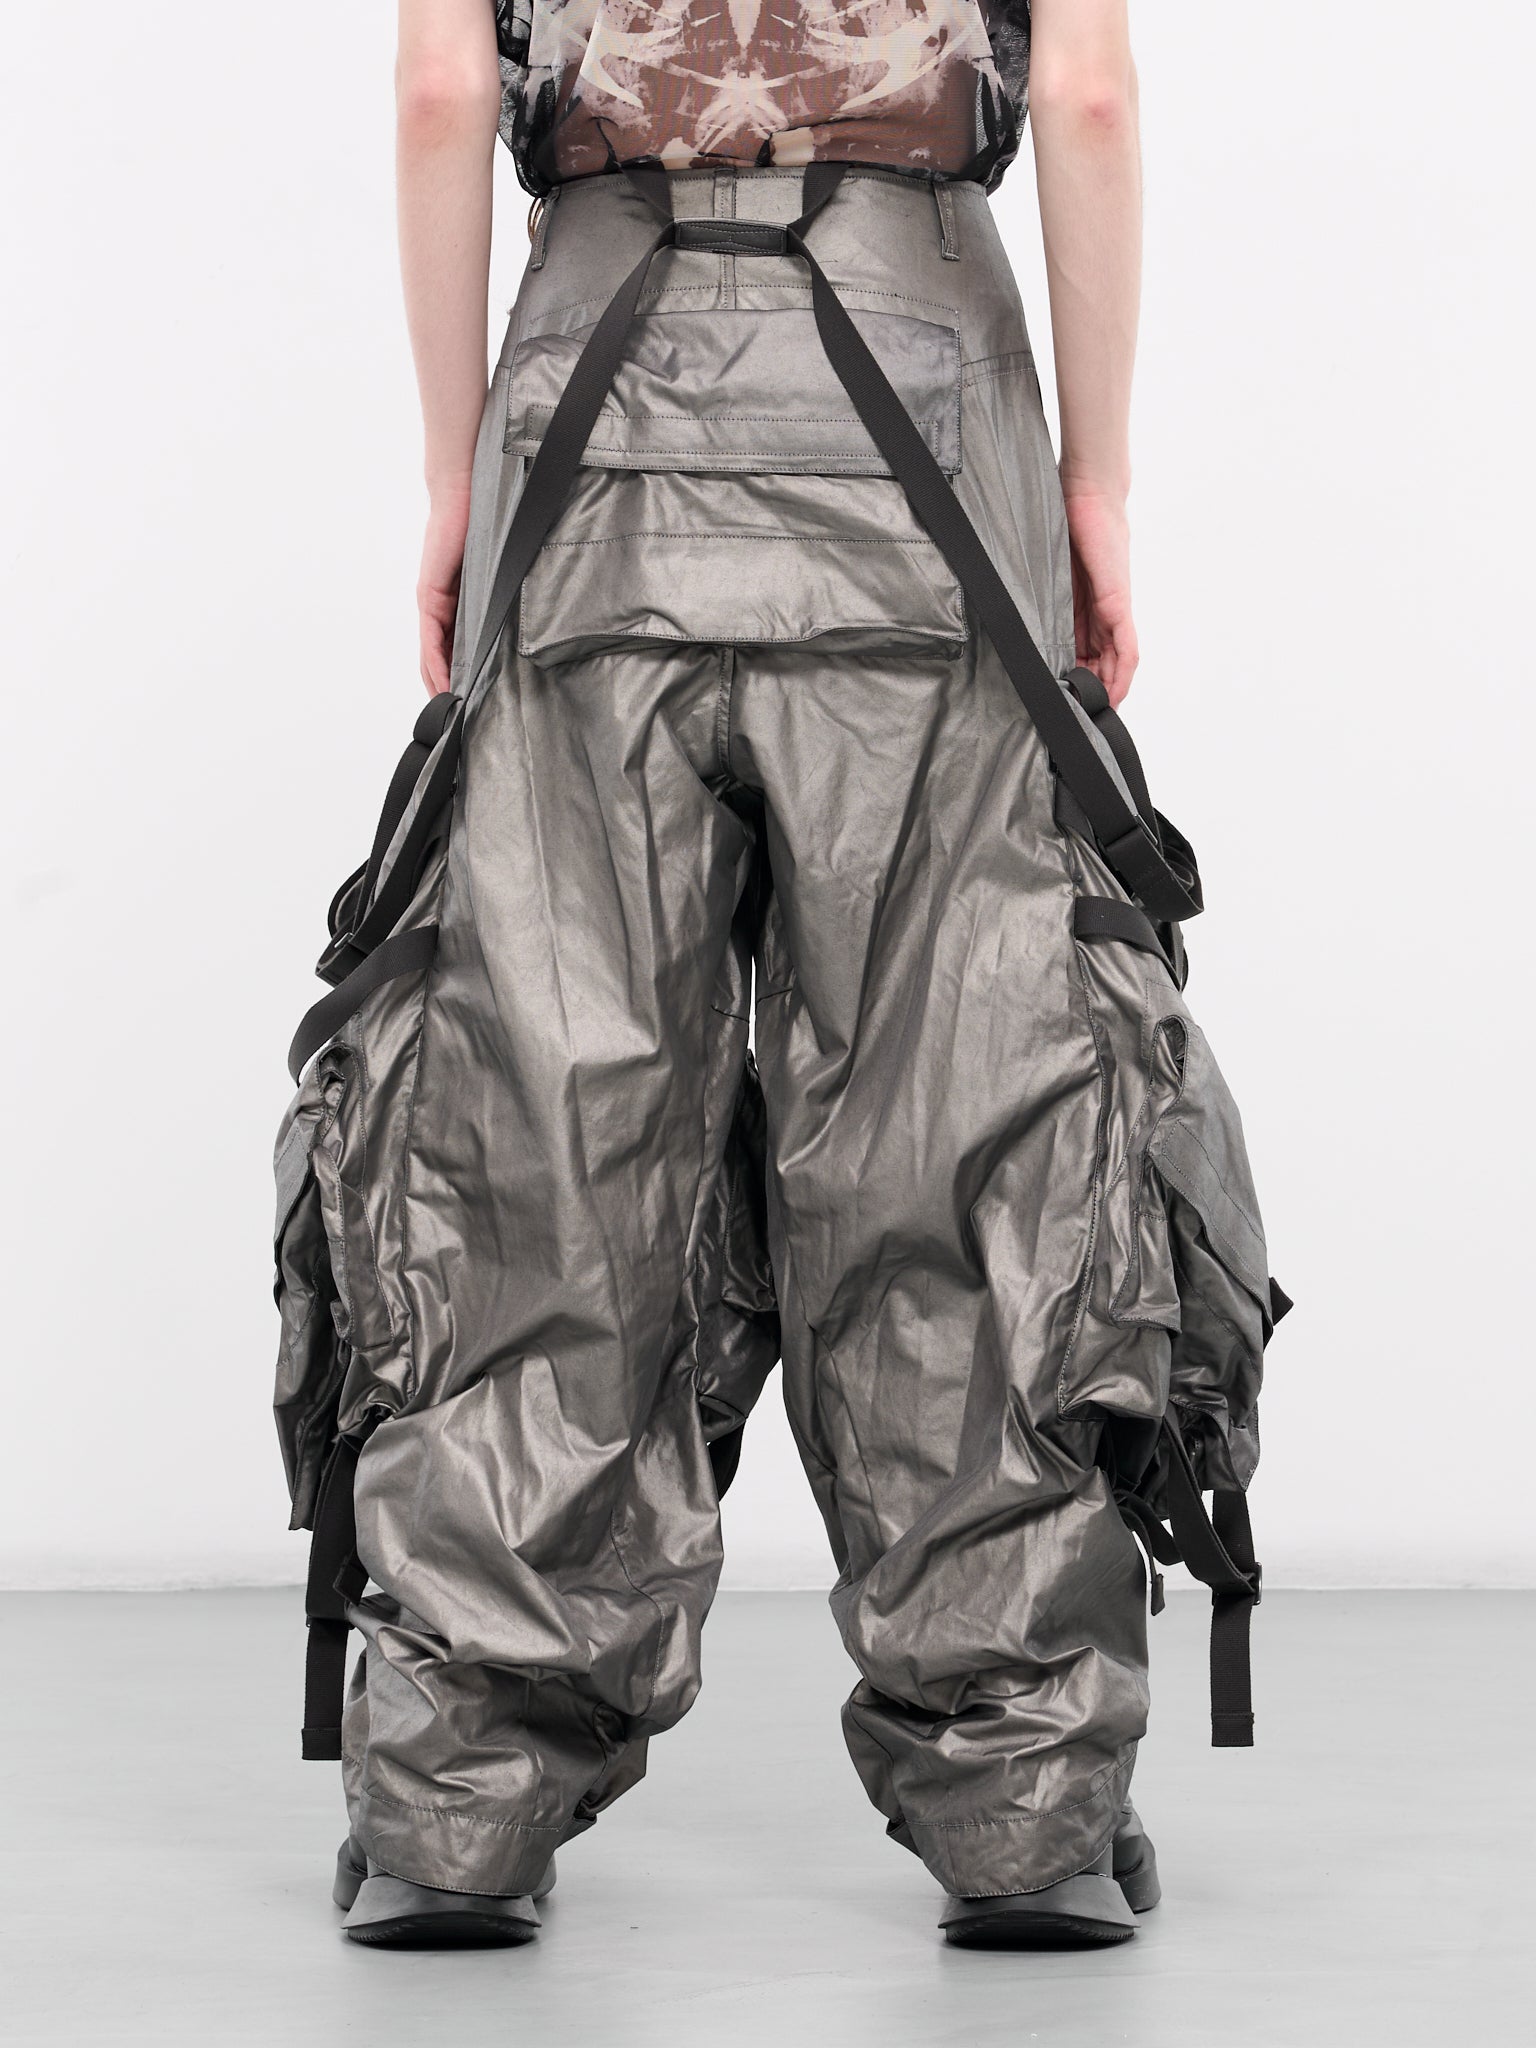 Strap Cargo Pants (857PAM10-S-SILVER-GRAY)